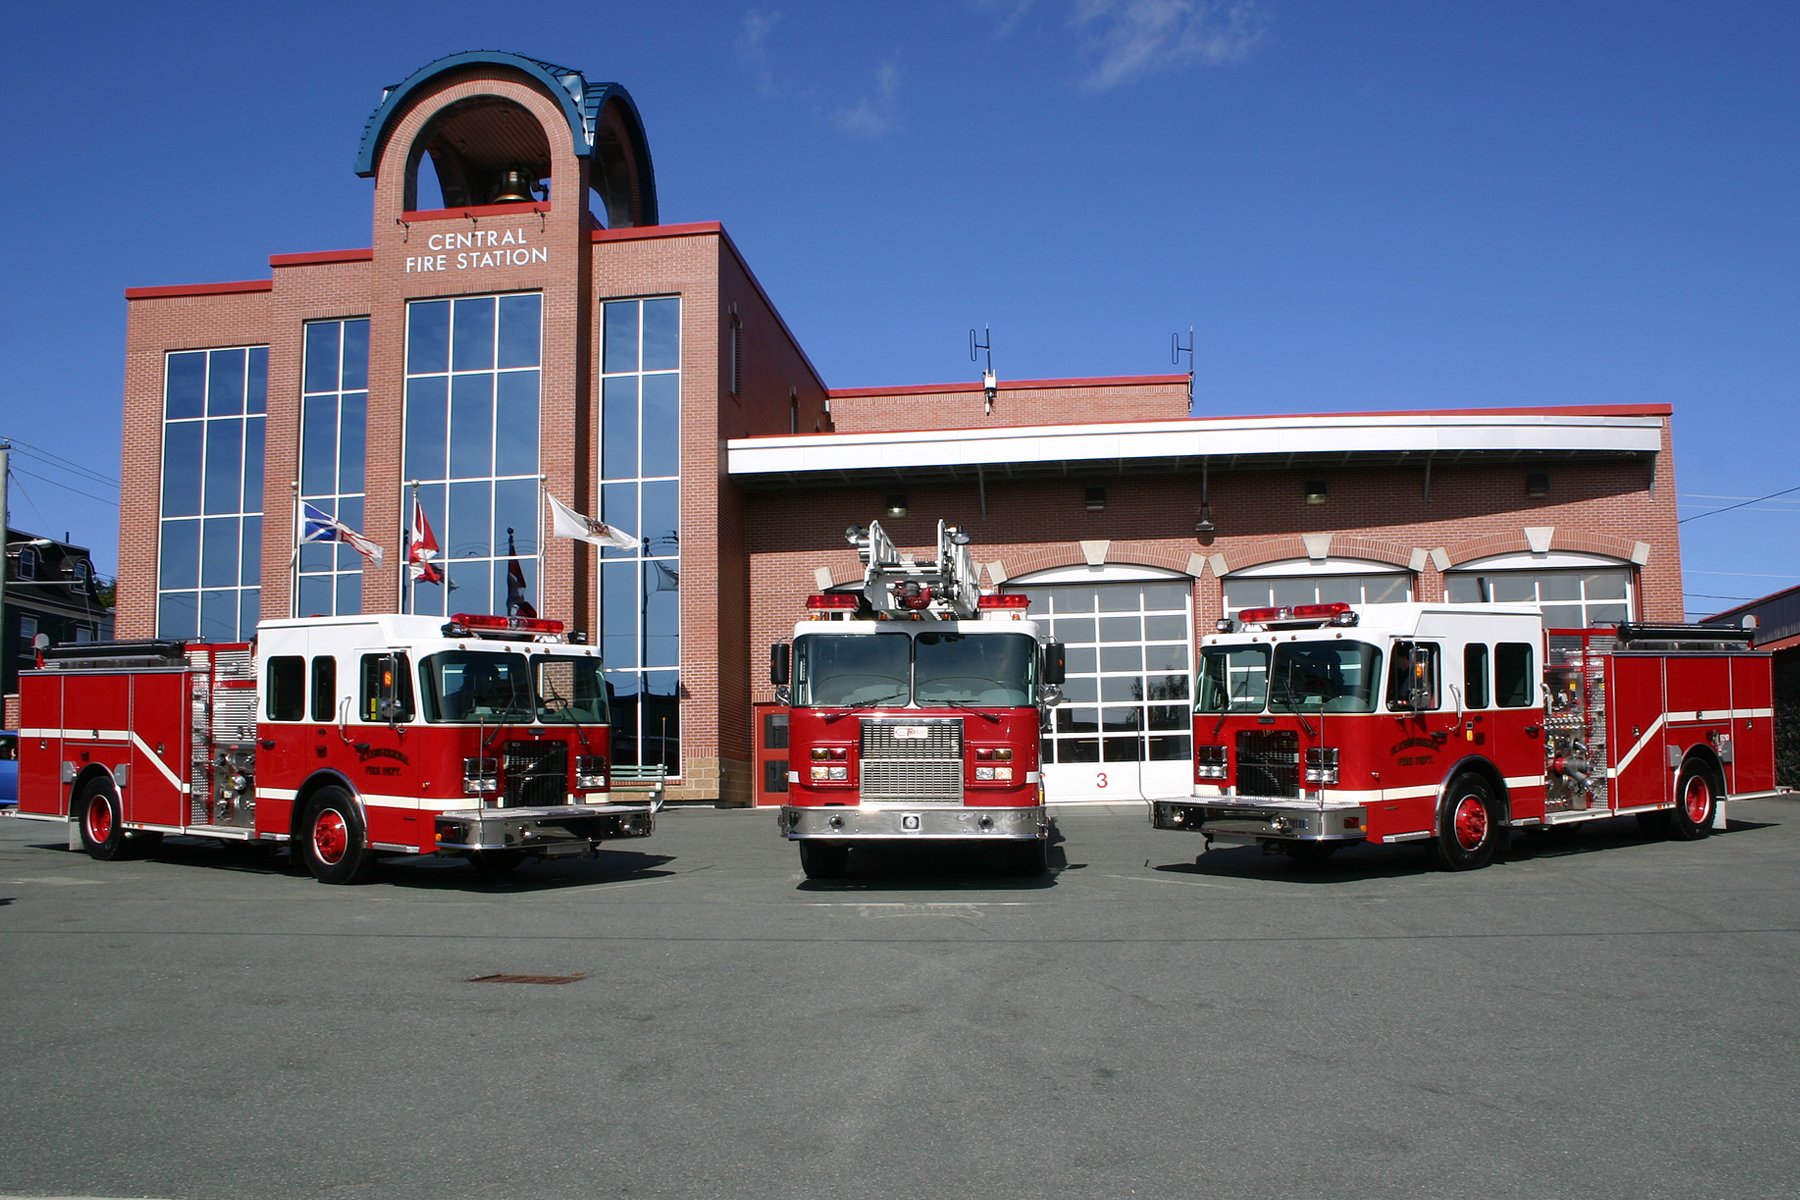 exterior of Central Fire station with three fire engines at large bay doors